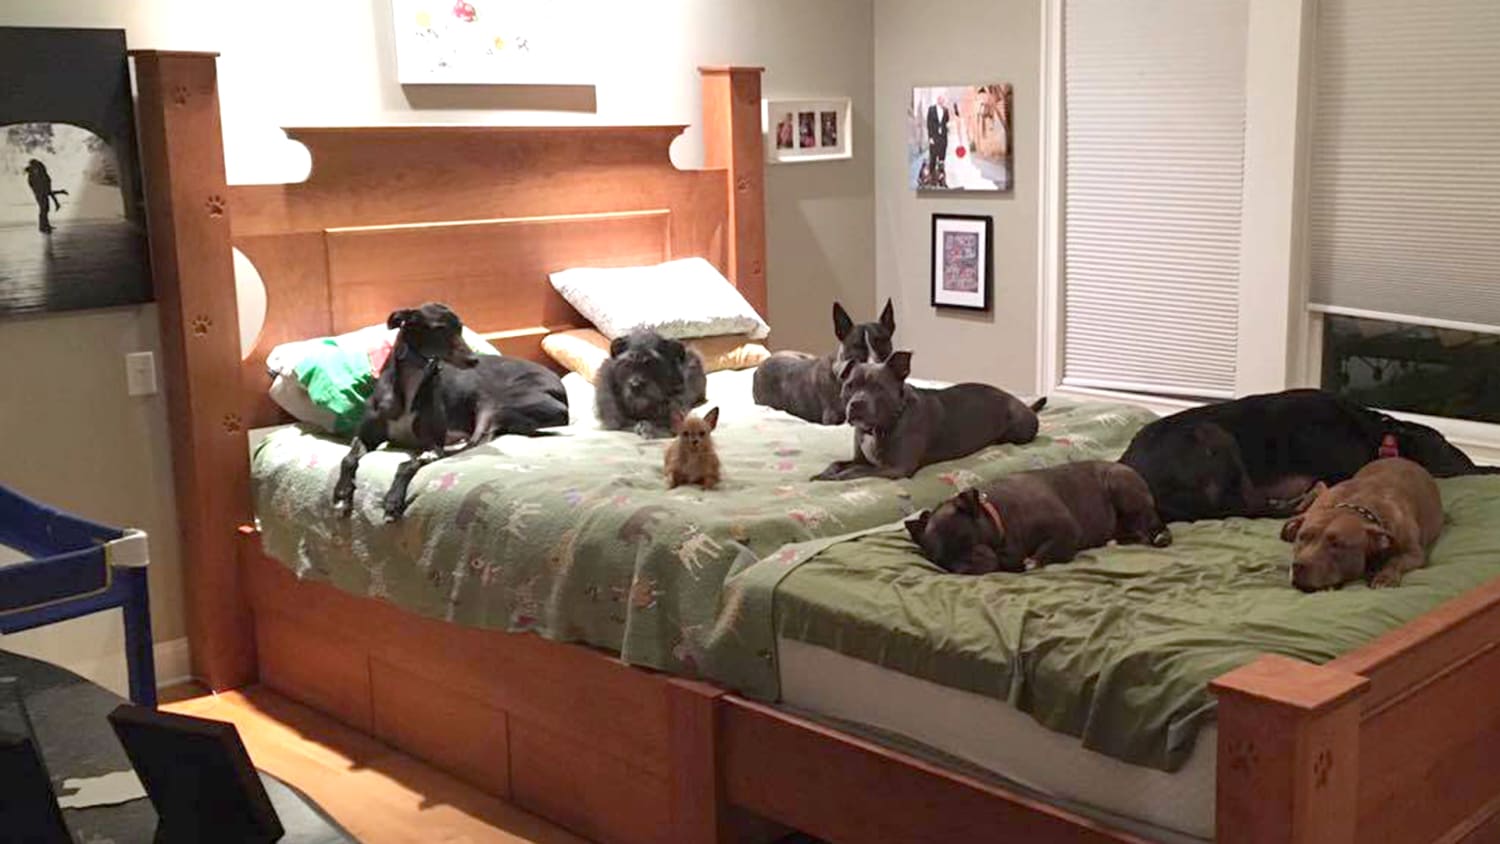 Giant Bed To Sleep Comfortably With 8 Dogs, King Size Bed With Dog Bed Insert